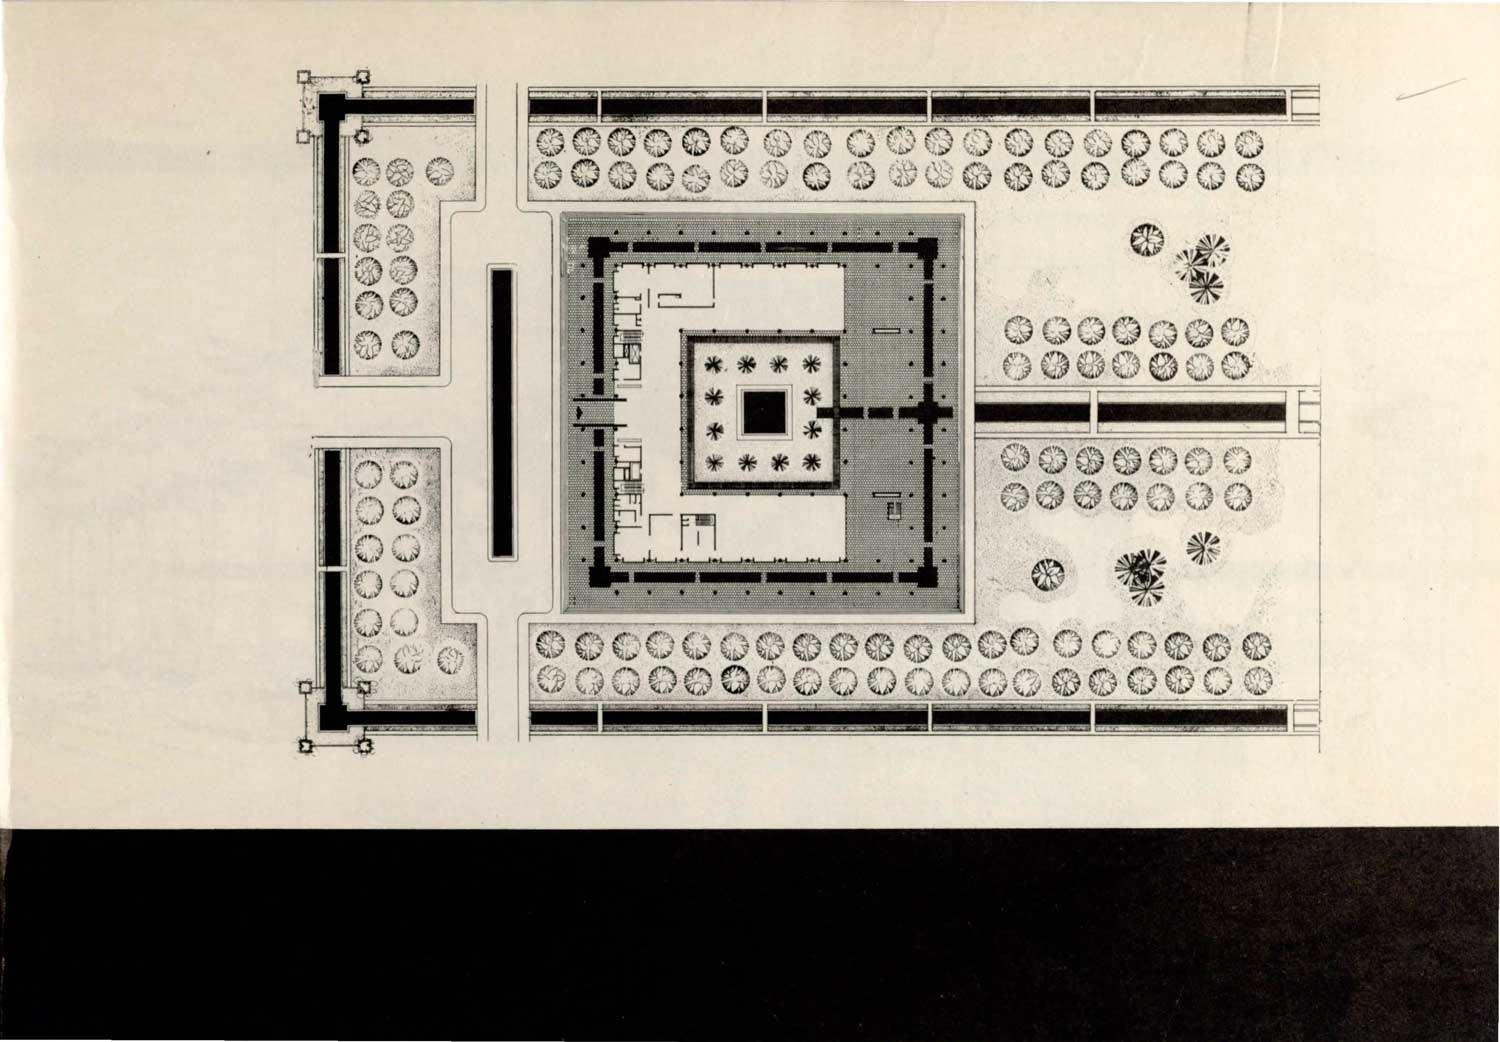 Architectural site plan for the Guest House, including the palace and gardens.